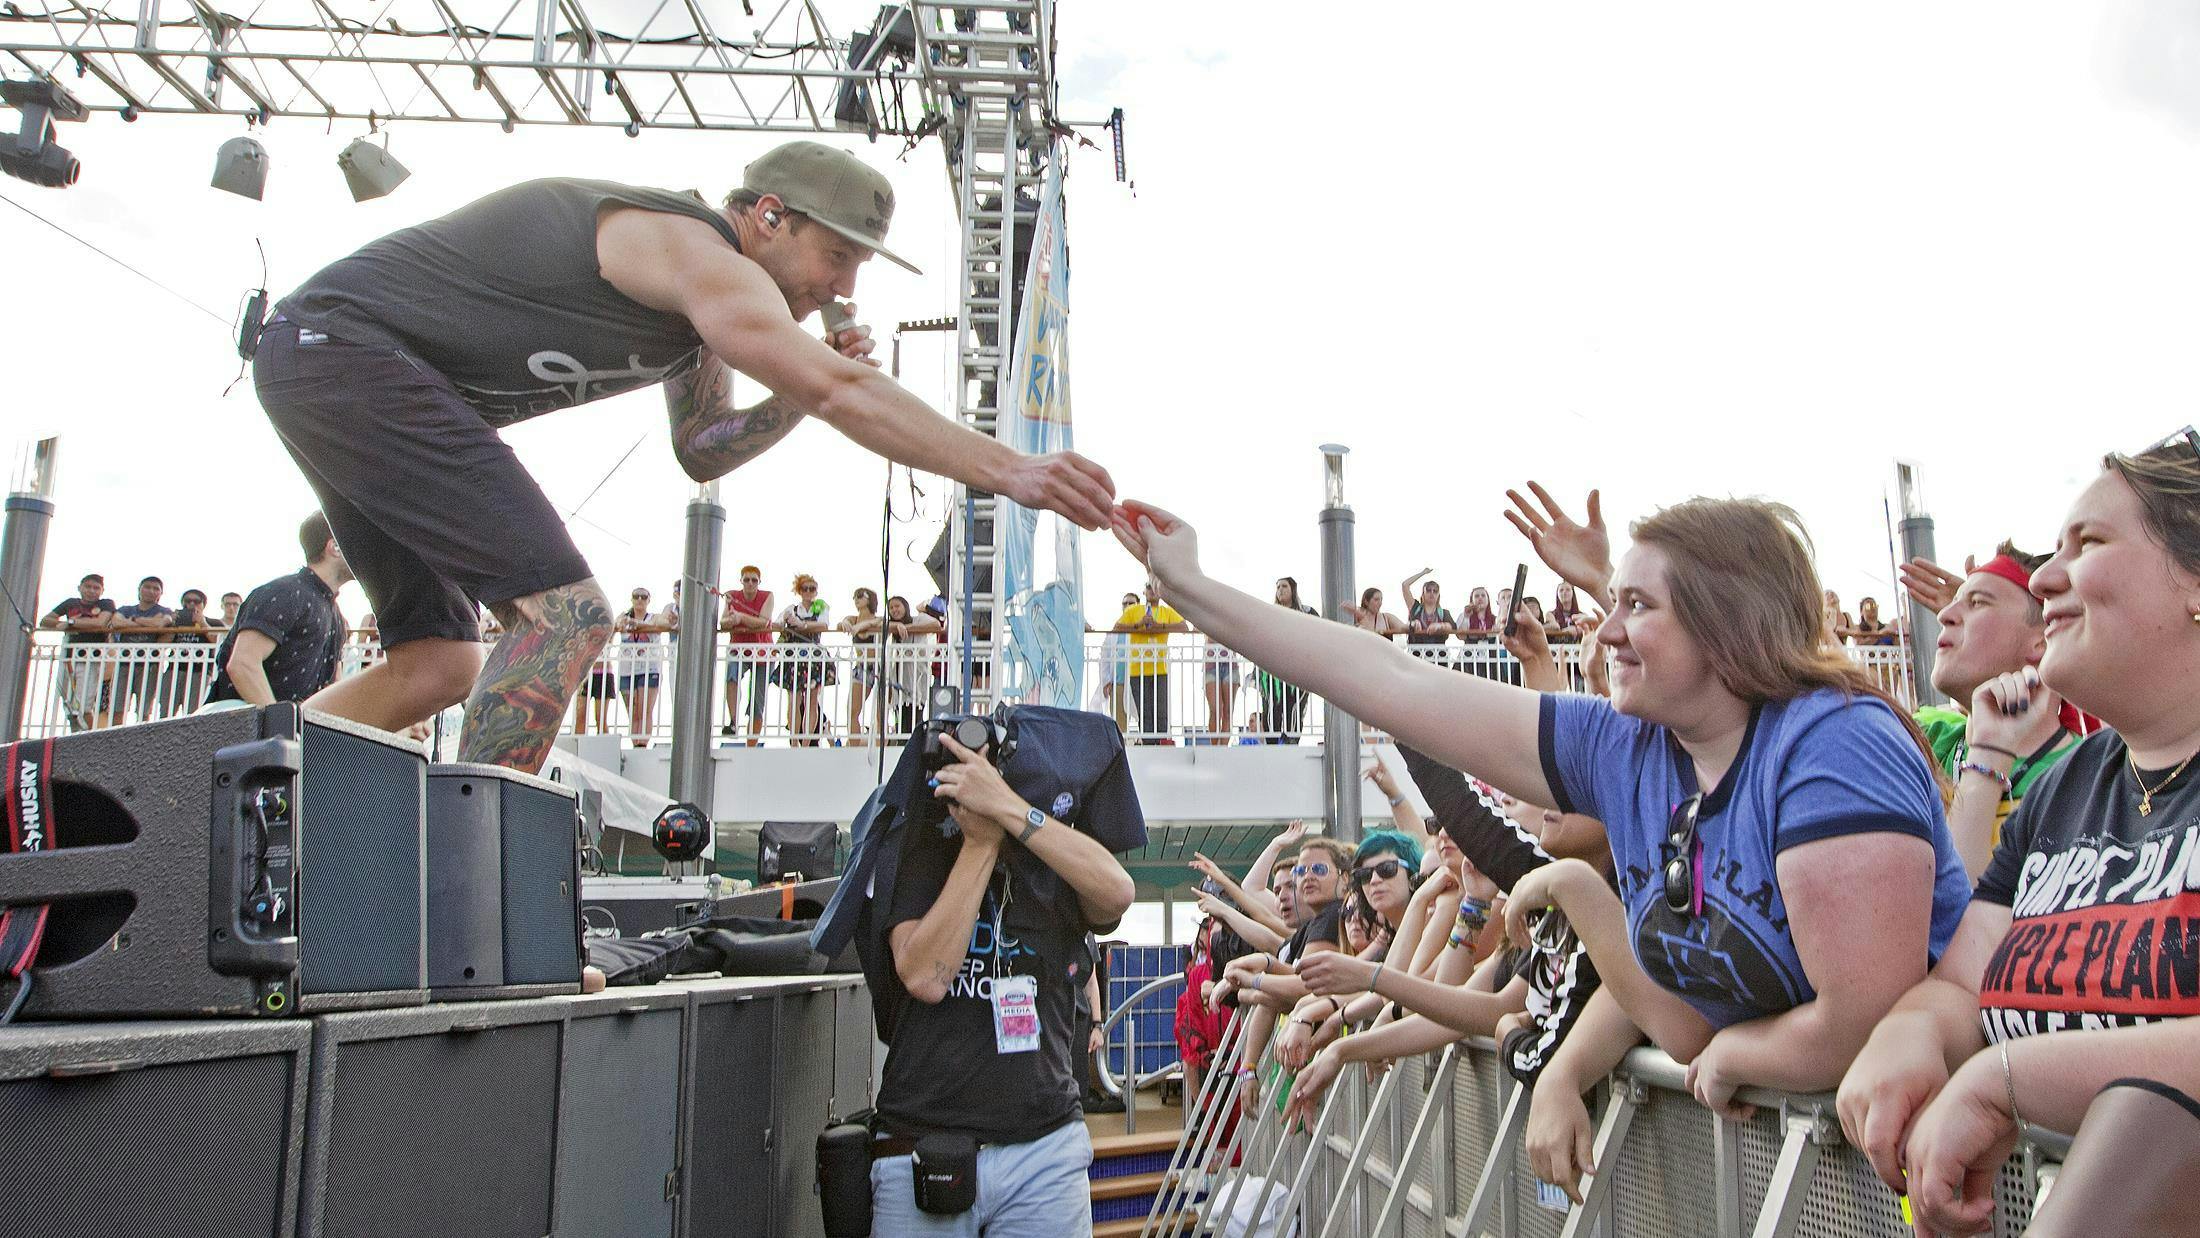 Simple Plan singer Pierre Bouvier hands a guitar pick to a fan in the front row.